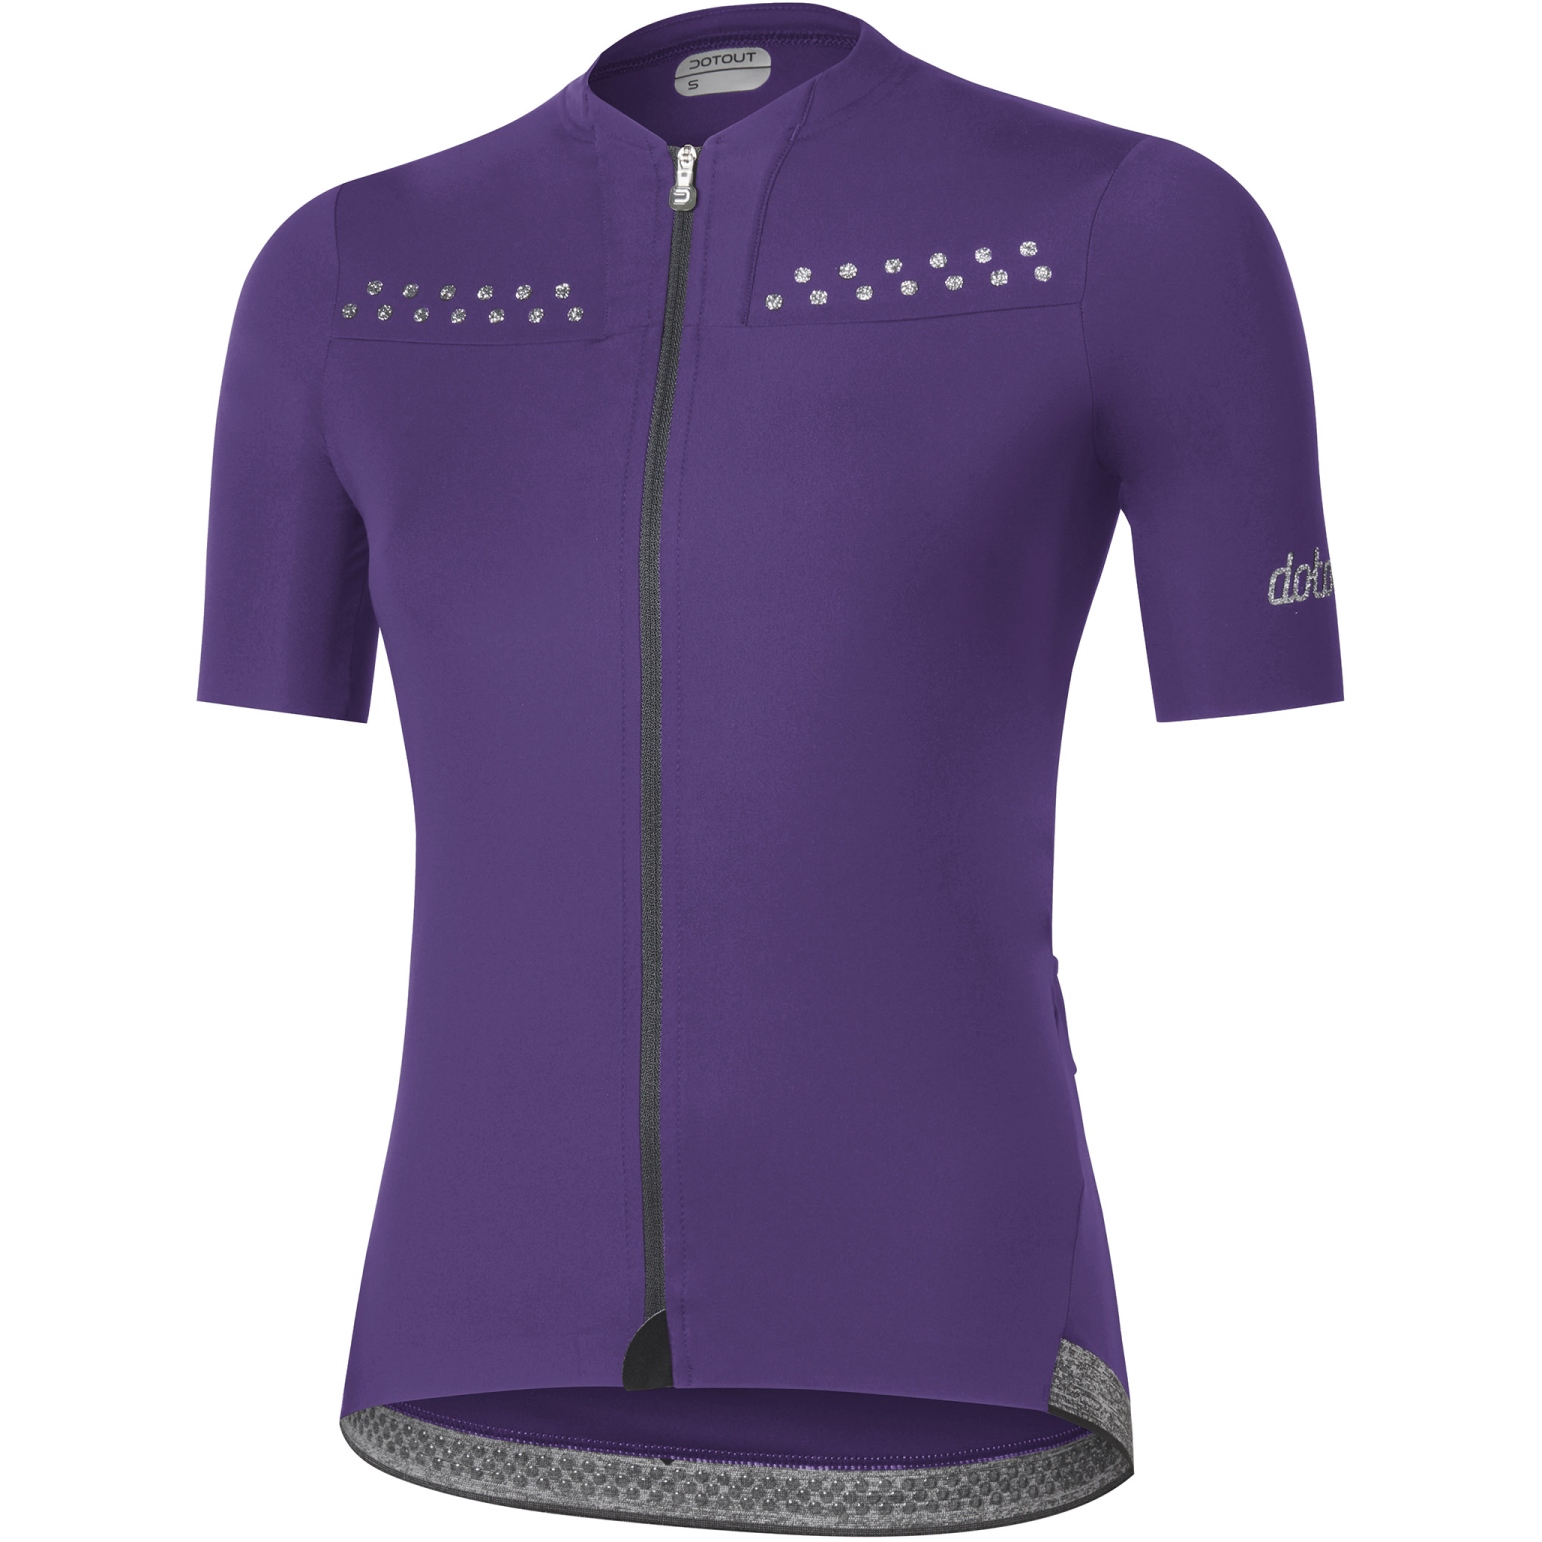 Picture of Dotout Star Jersey Women - violet